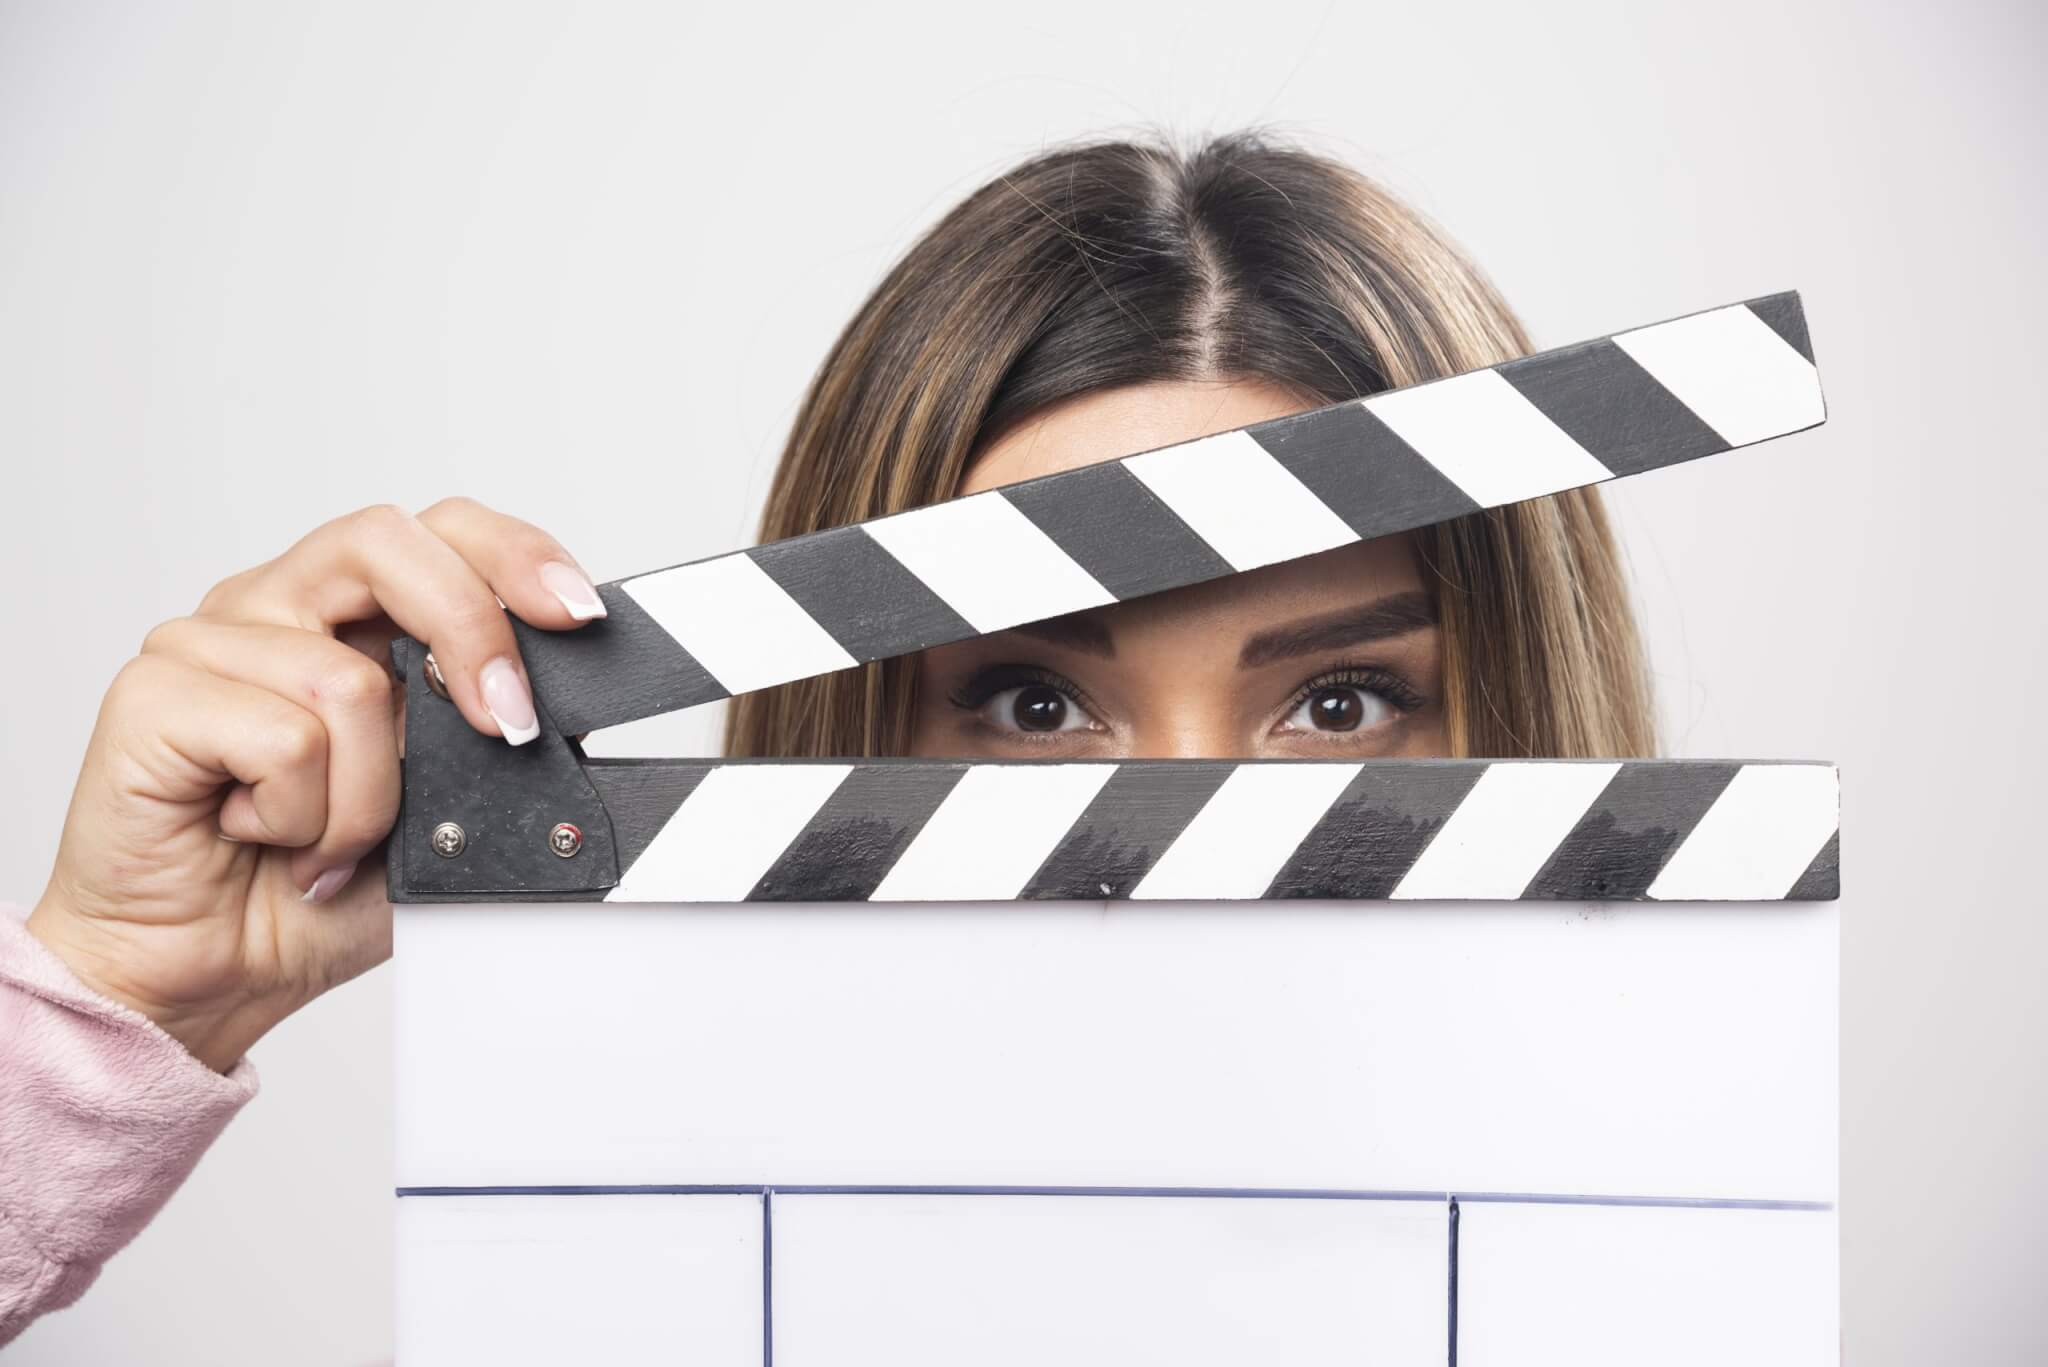 How to make videos to sell: discover the keys to achieve it